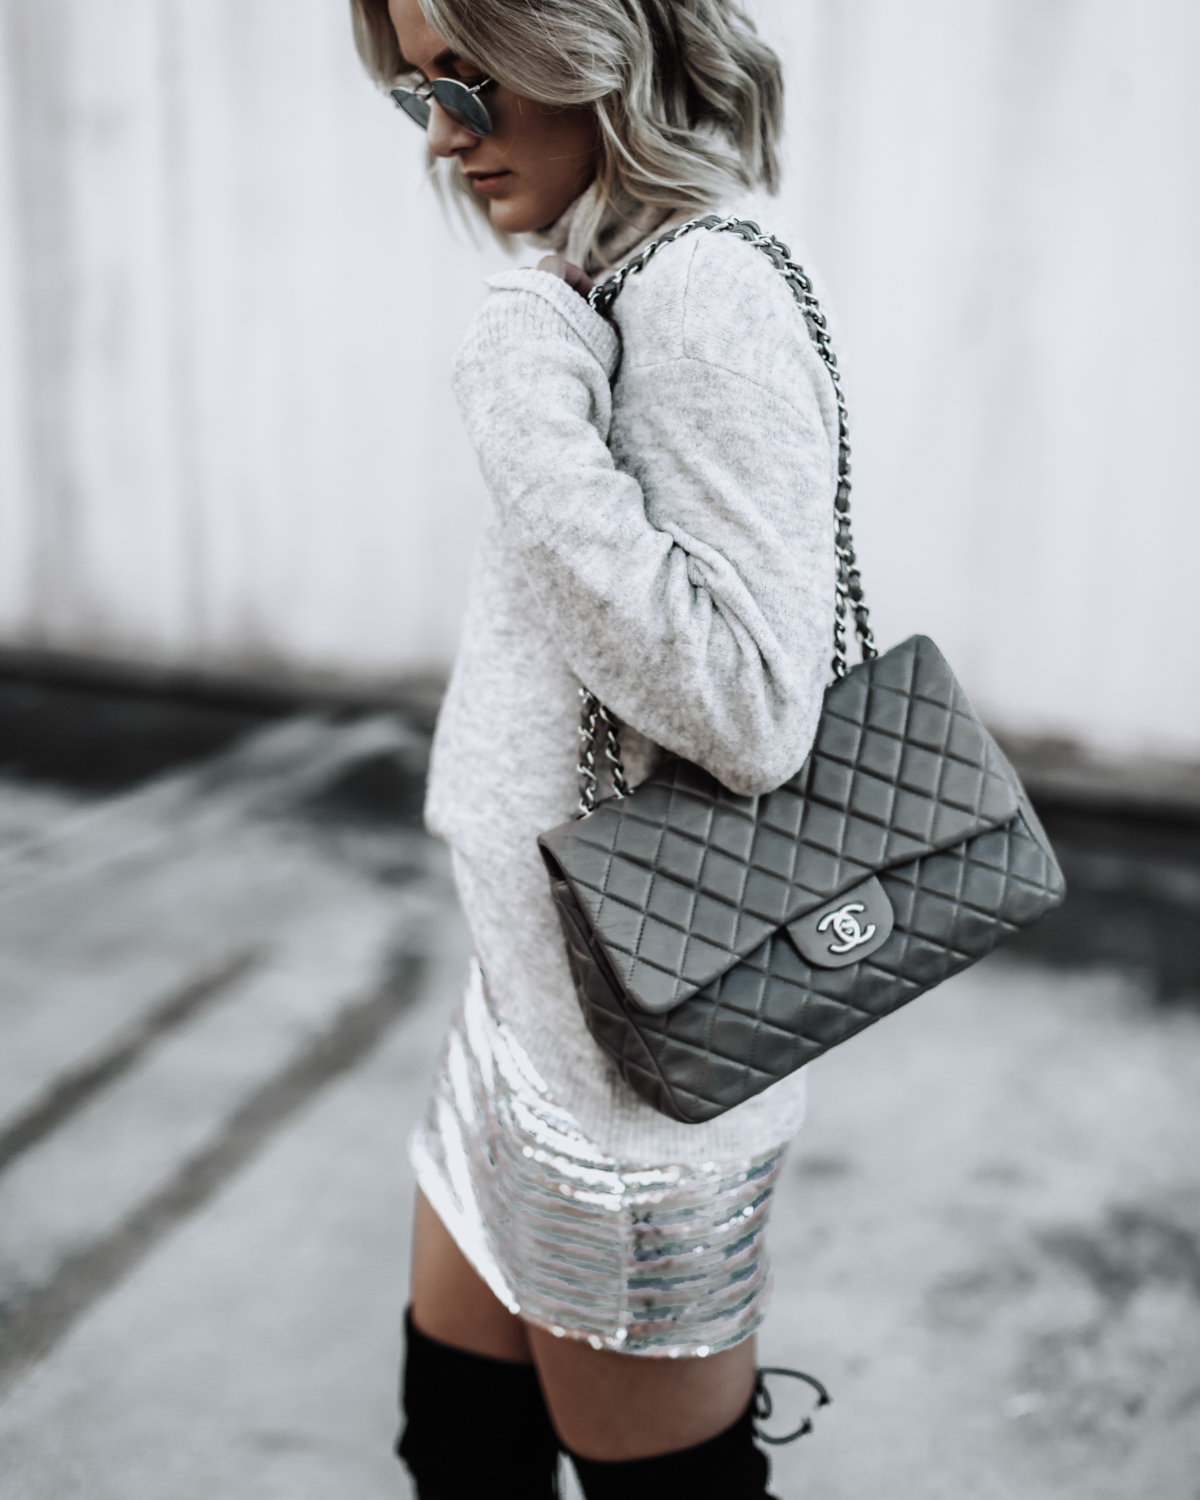 grey chanel flap bag from Tradesy worn by Sage Coralli of So Sage Blog